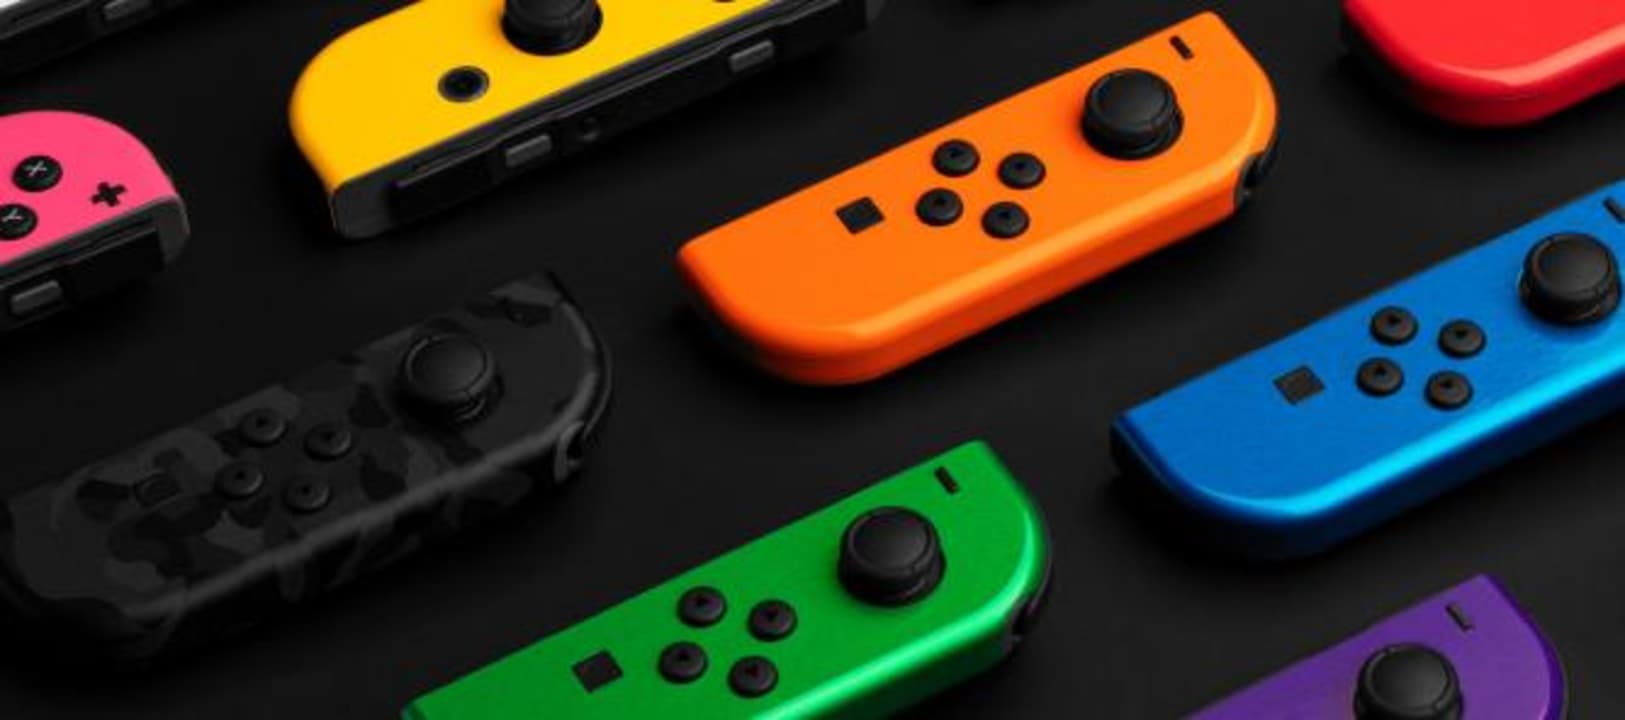 Steam adds support for Nintendo Switch Joy-Con controllers